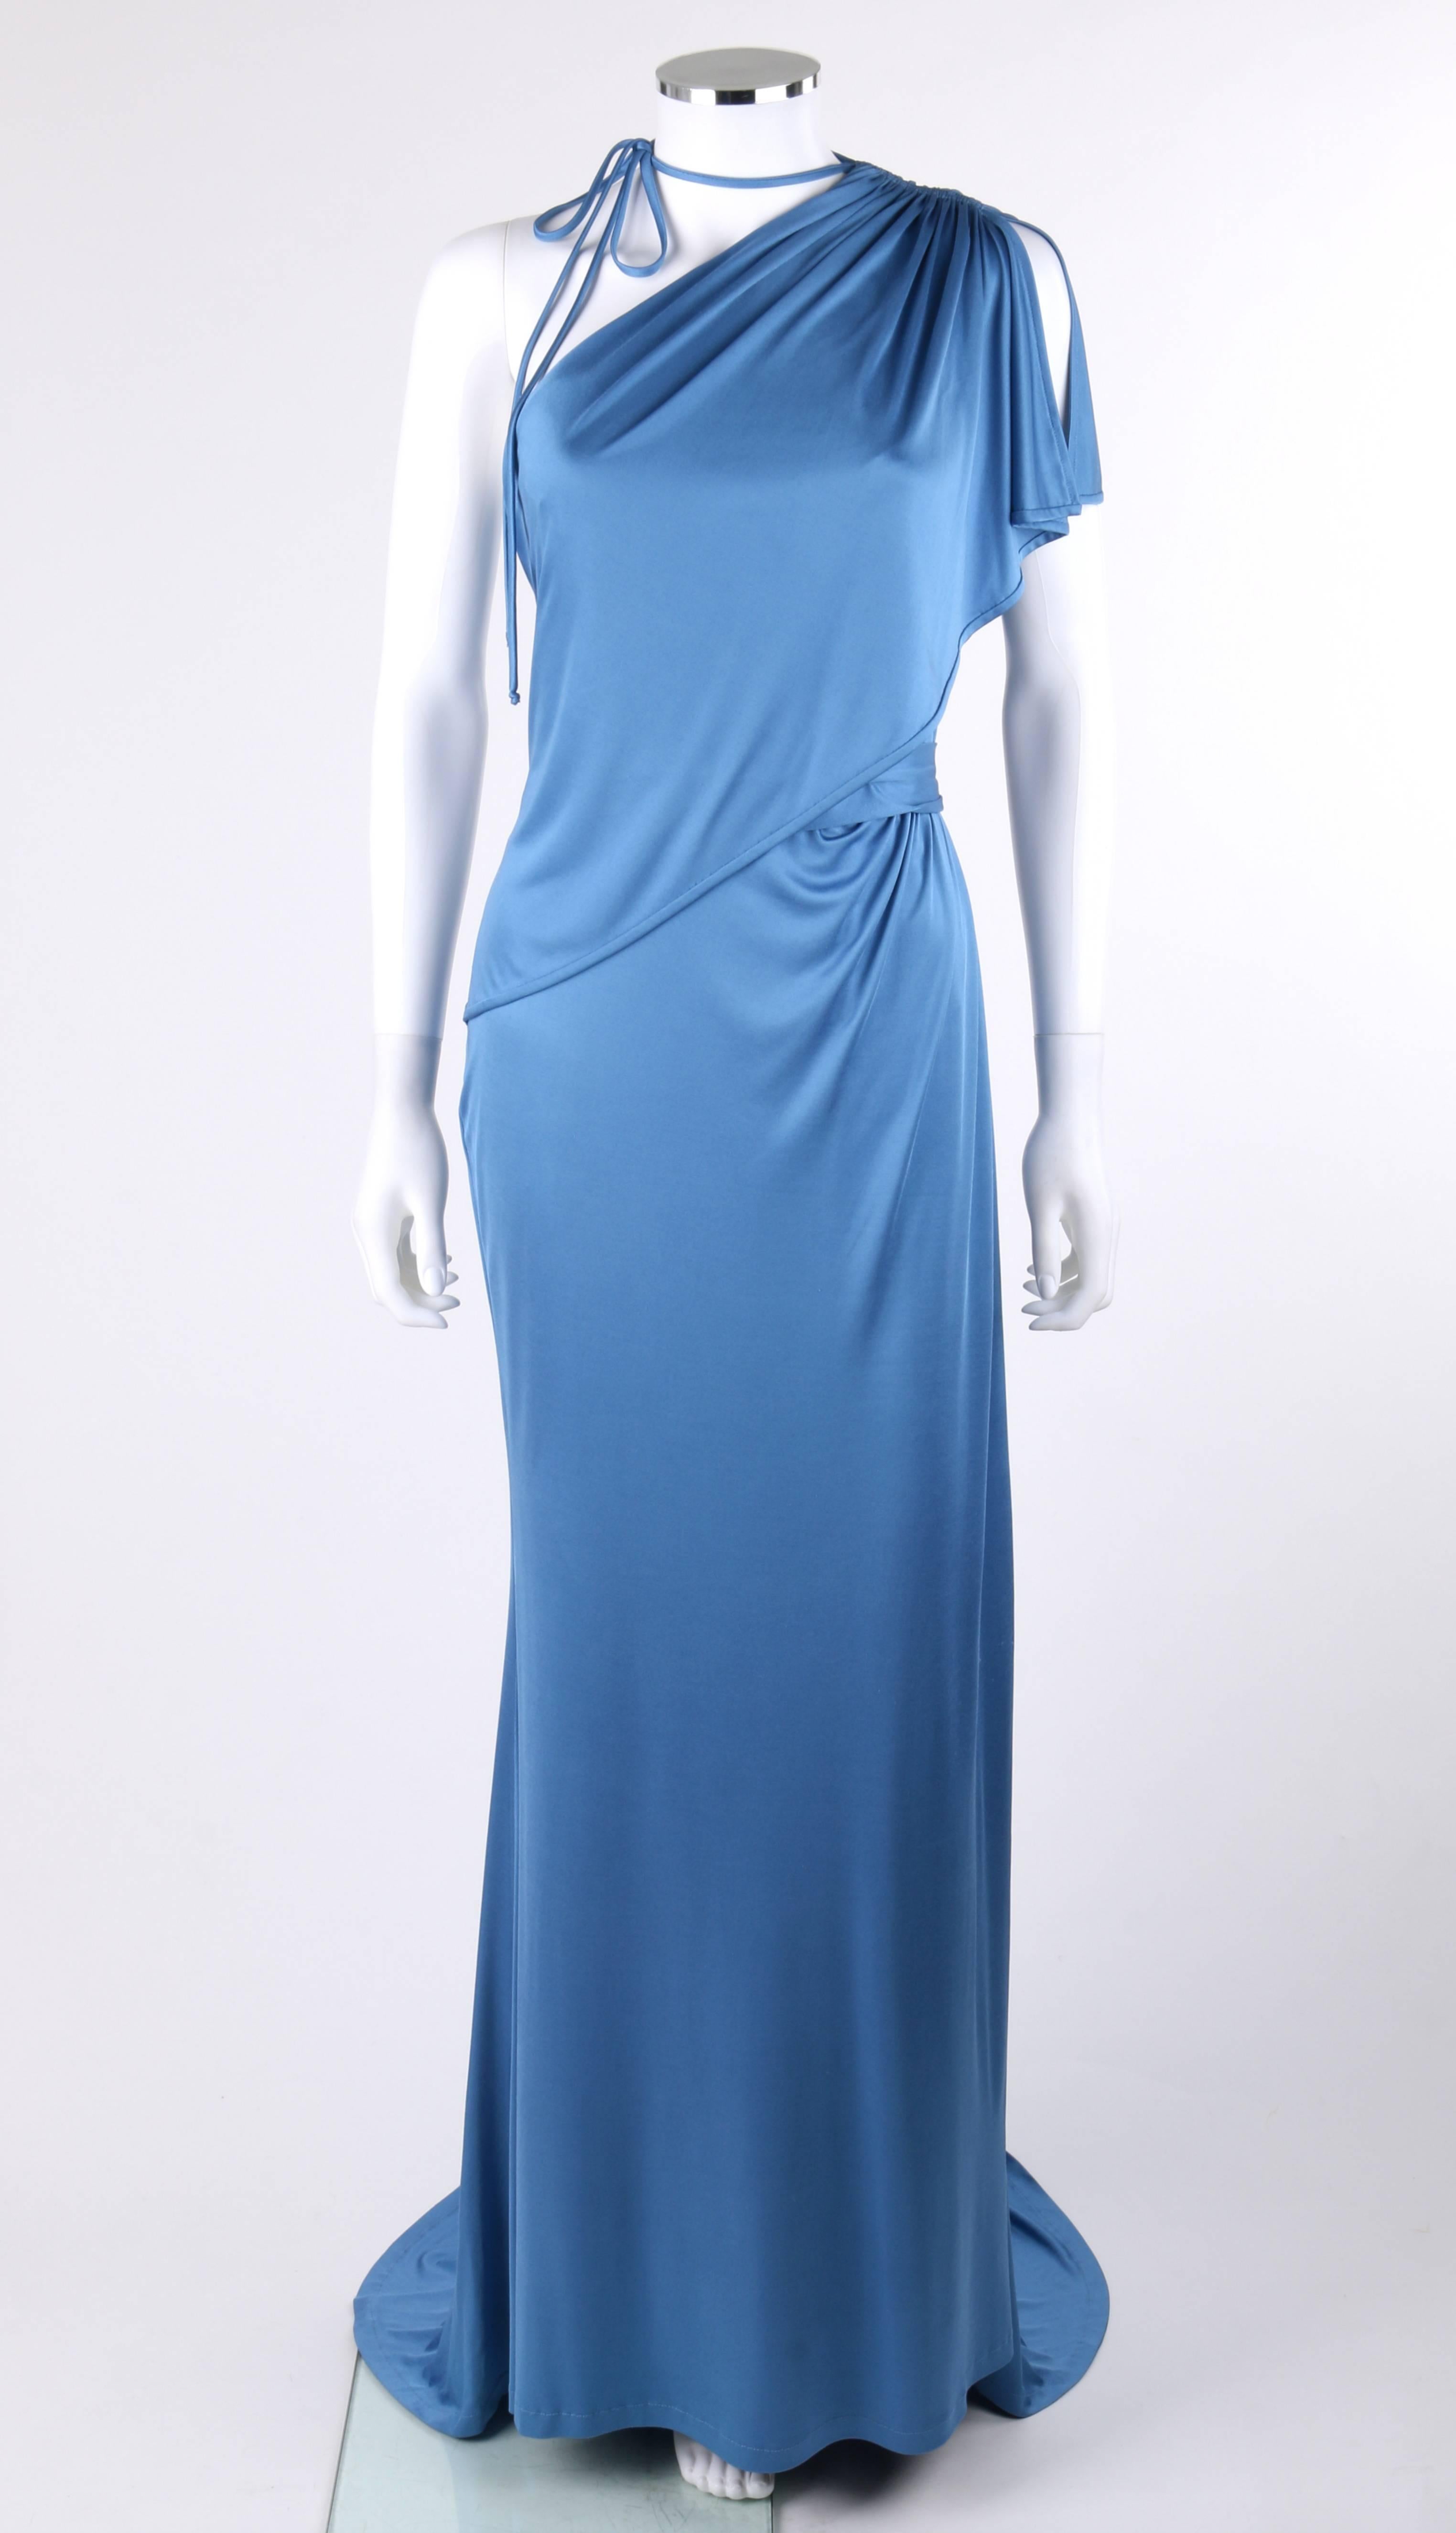 Carolina Herrera Resort 2011 blue silk jersey knit one shoulder grecian draped evening gown dress. Runway look #22. One shoulder with ruched detail and thin fabric ties at shoulder. Draped bodice overlay from left shoulder to waist forming short